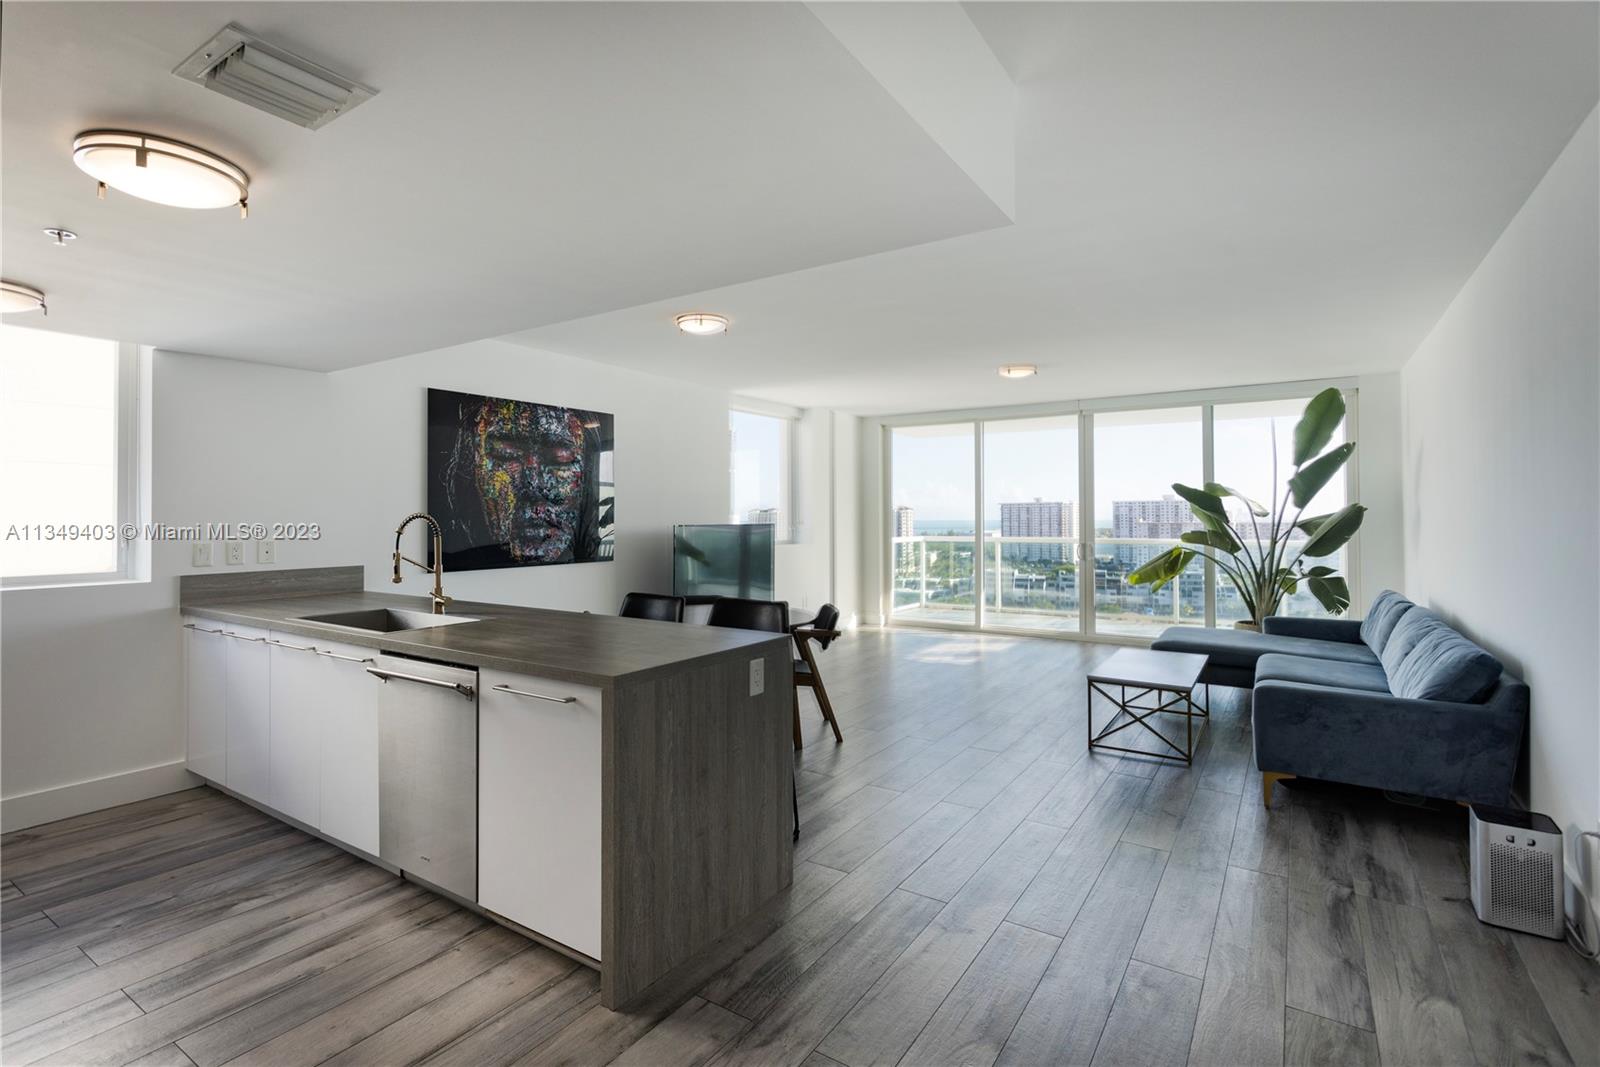 Most desired corner line with open views to the ocean, intracoastal, city, and Oleta State Park. Floorthrough unit features 1872 SF 3 ensuite beds, open concept kitchen, dining, living room with floor to ceiling windows and access to the balcony with one of the best views Miami has to offer. Unit has E, S, N exposures and is flooded with natural light offering 270 degree views. Wood-like porcelain tile found throughout including the balcony. Great services and amenities include full service dry & wet marina, tennis court, pool, gym, spa, restaurant, concierge, security, valet, etc. Within close proximity to gourmet restaurants, shops including the famous Bal Harbour and Aventura Malls, highly rated schools, and the beach. Open water by boat in under 10min. Unit also for sale or seasonal